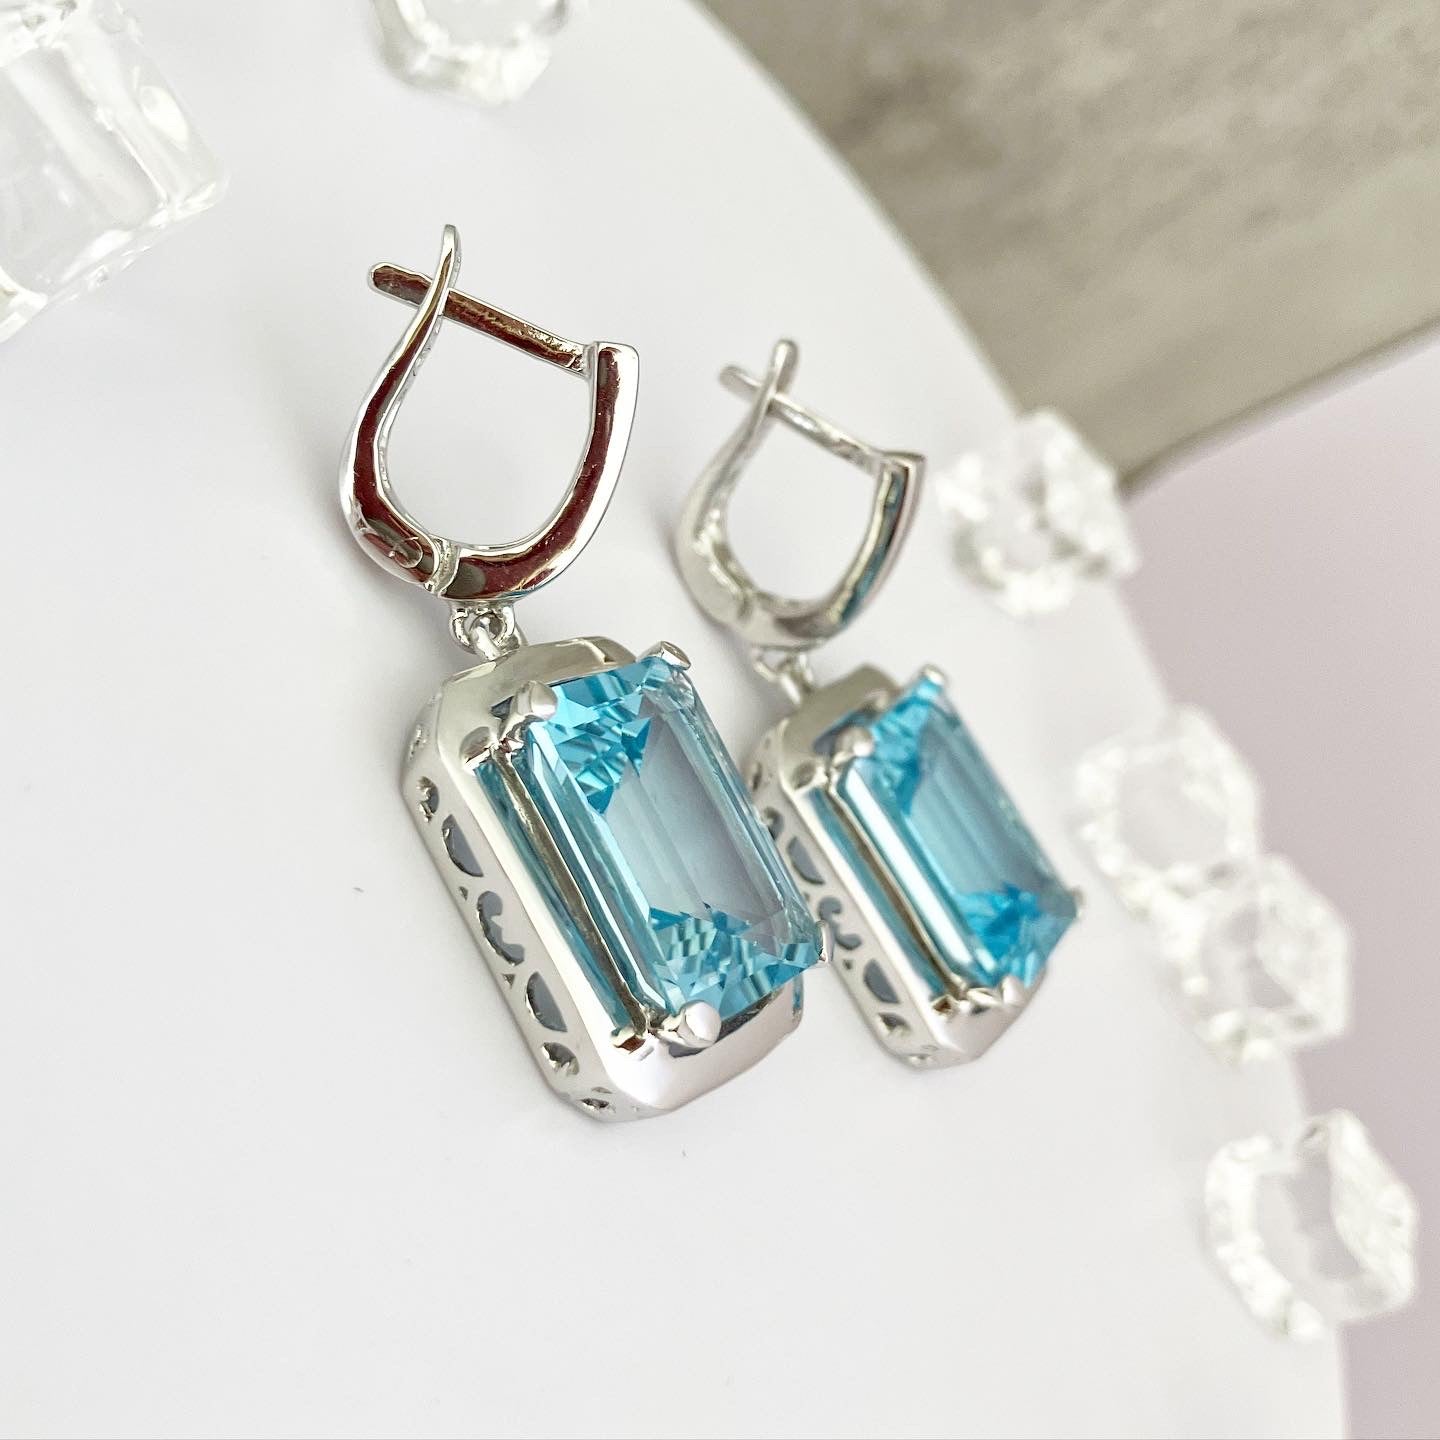 Earrings silver 925 samples with topaz sky BLUE.